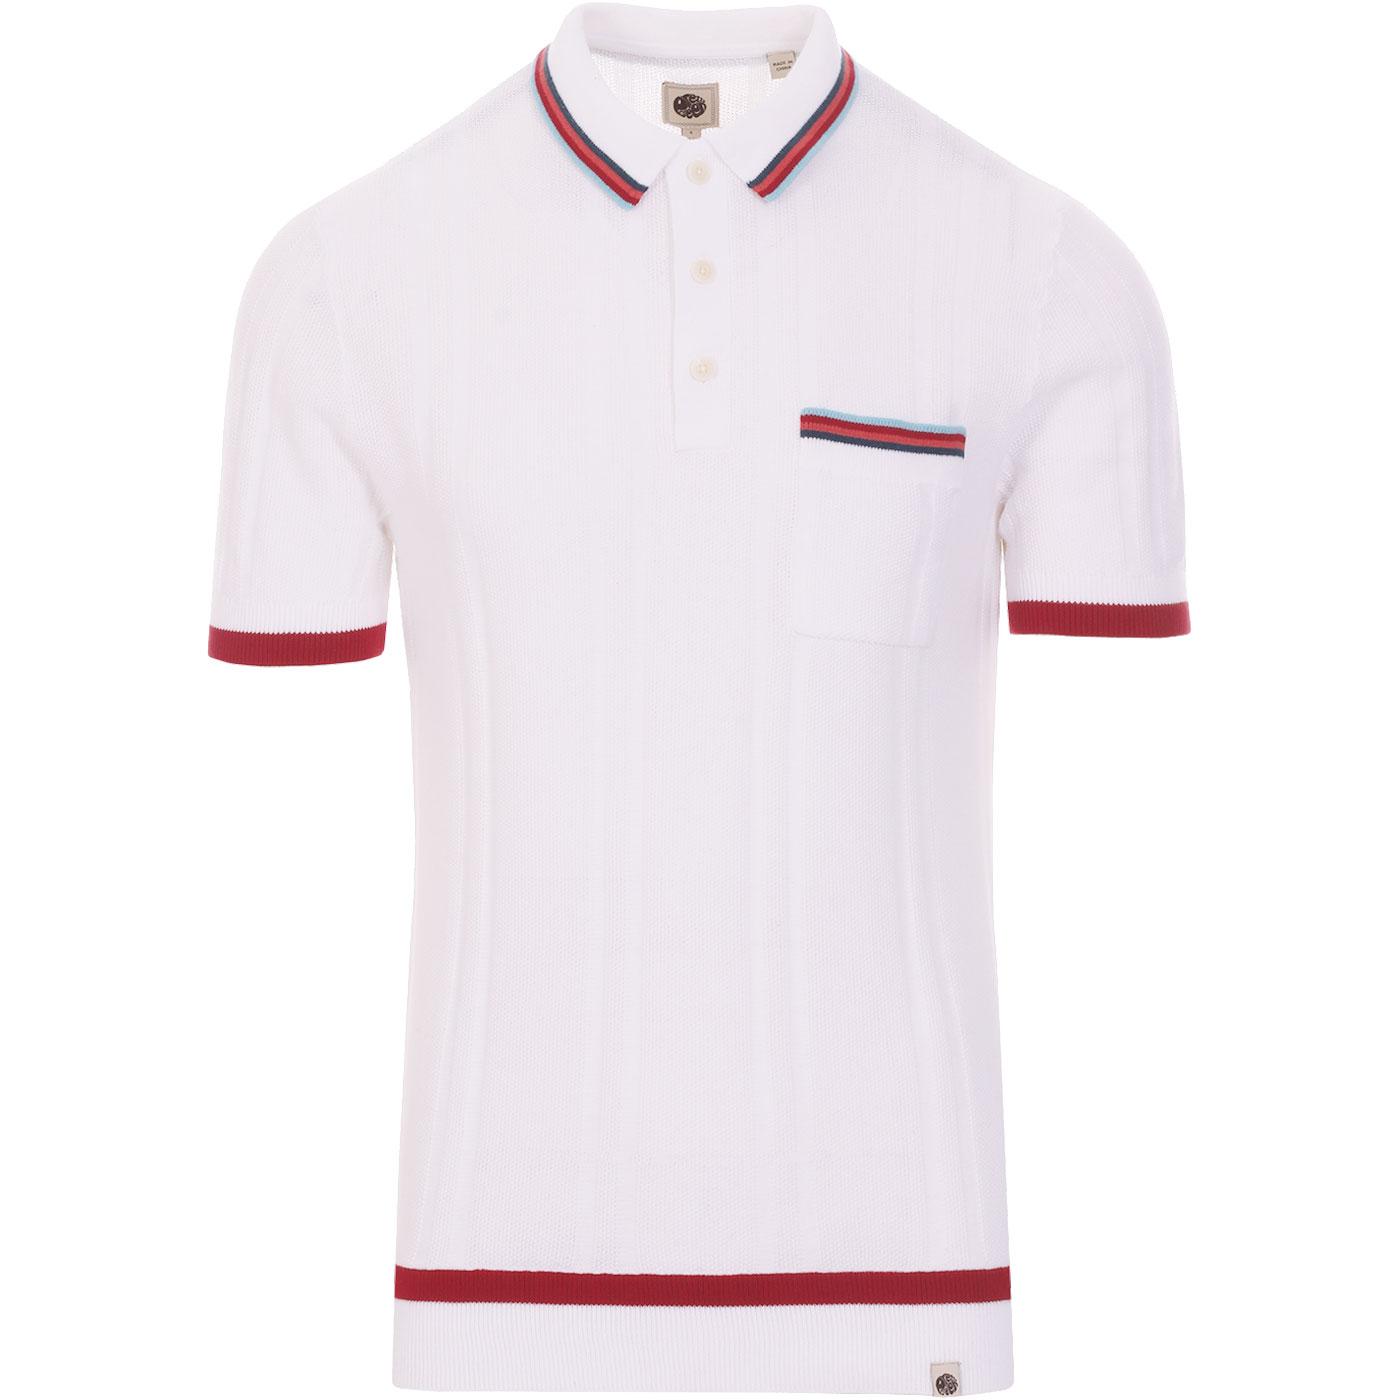 PRETTY GREEN Textured Knit Striped Pocket Polo in White